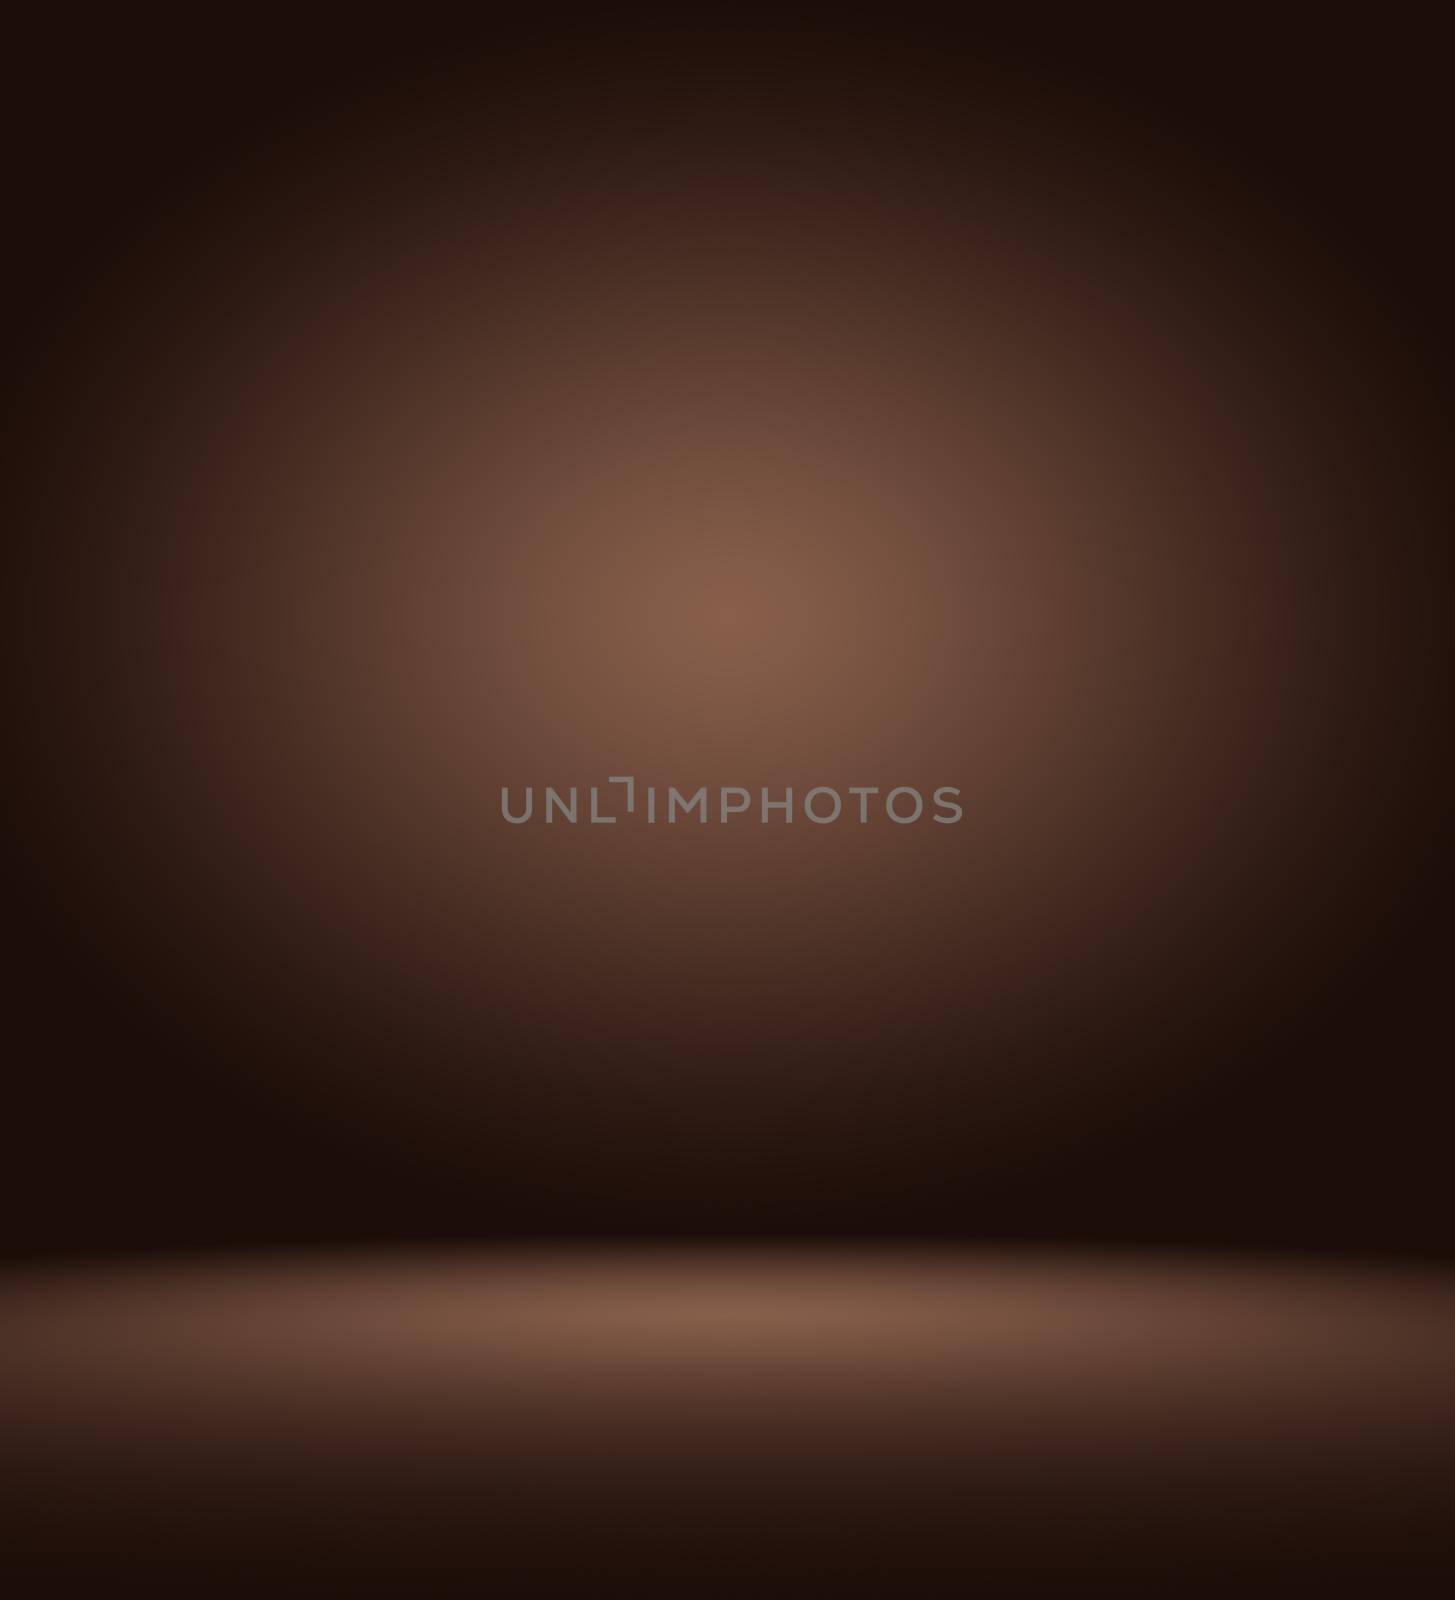 Abstract luxury dark brown and brown gradient with border brown vignette, Studio backdrop - well use as backdrop background, board, studio background.